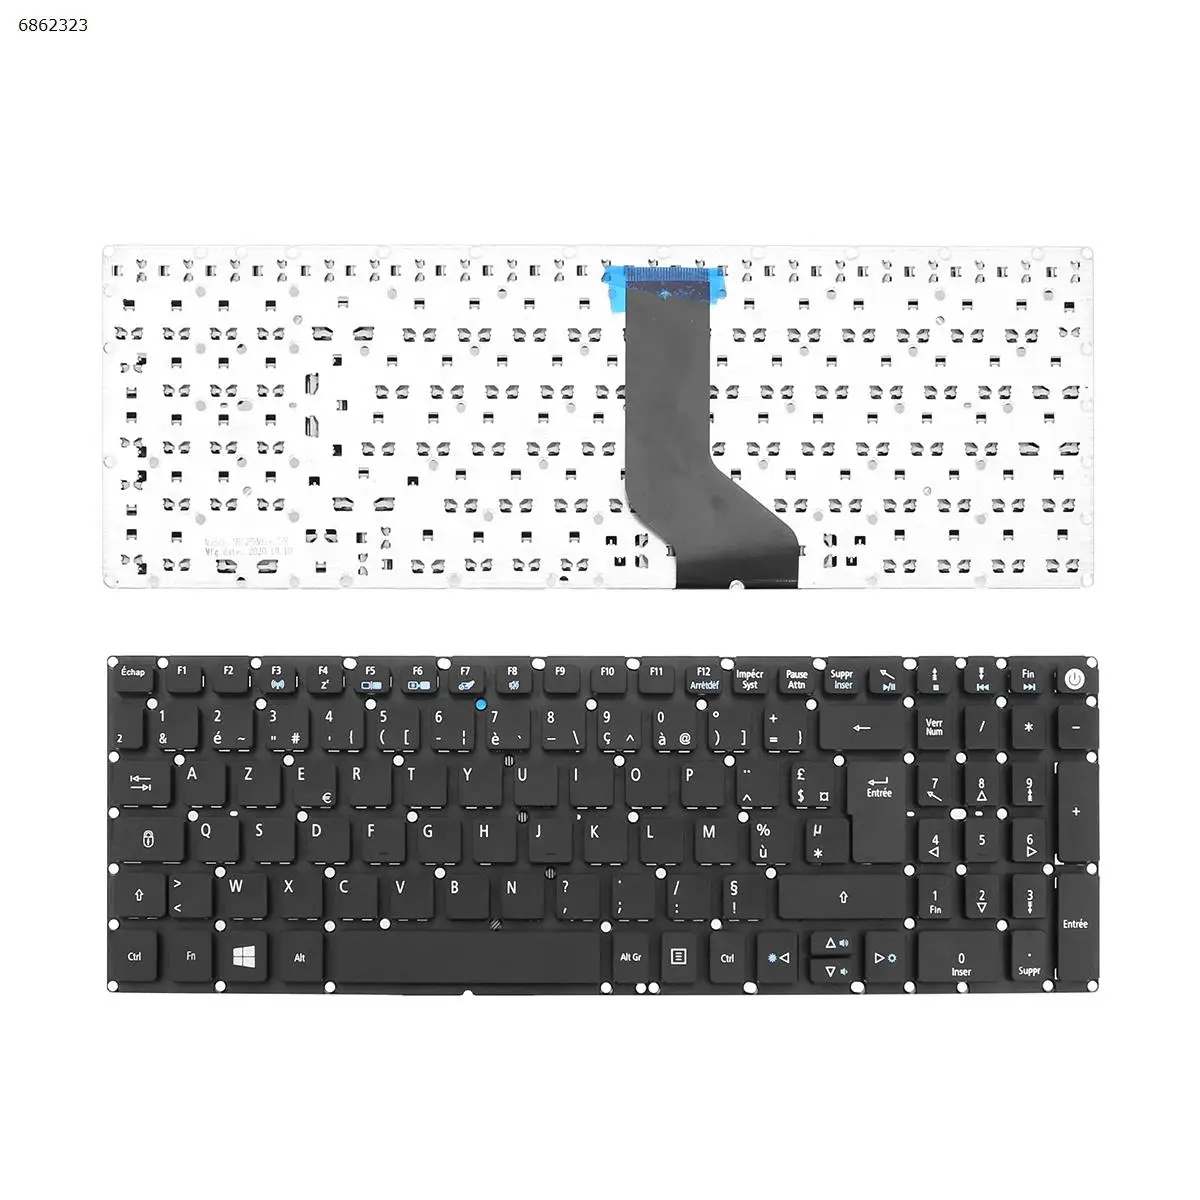 

French AZERTY New Keyboard for Acer E5-573 E5-573G E5-573T E5-573TG E5-722 E5-522 E5-522G E5-532 E5-532G E5-532T E5-772 V3-574G